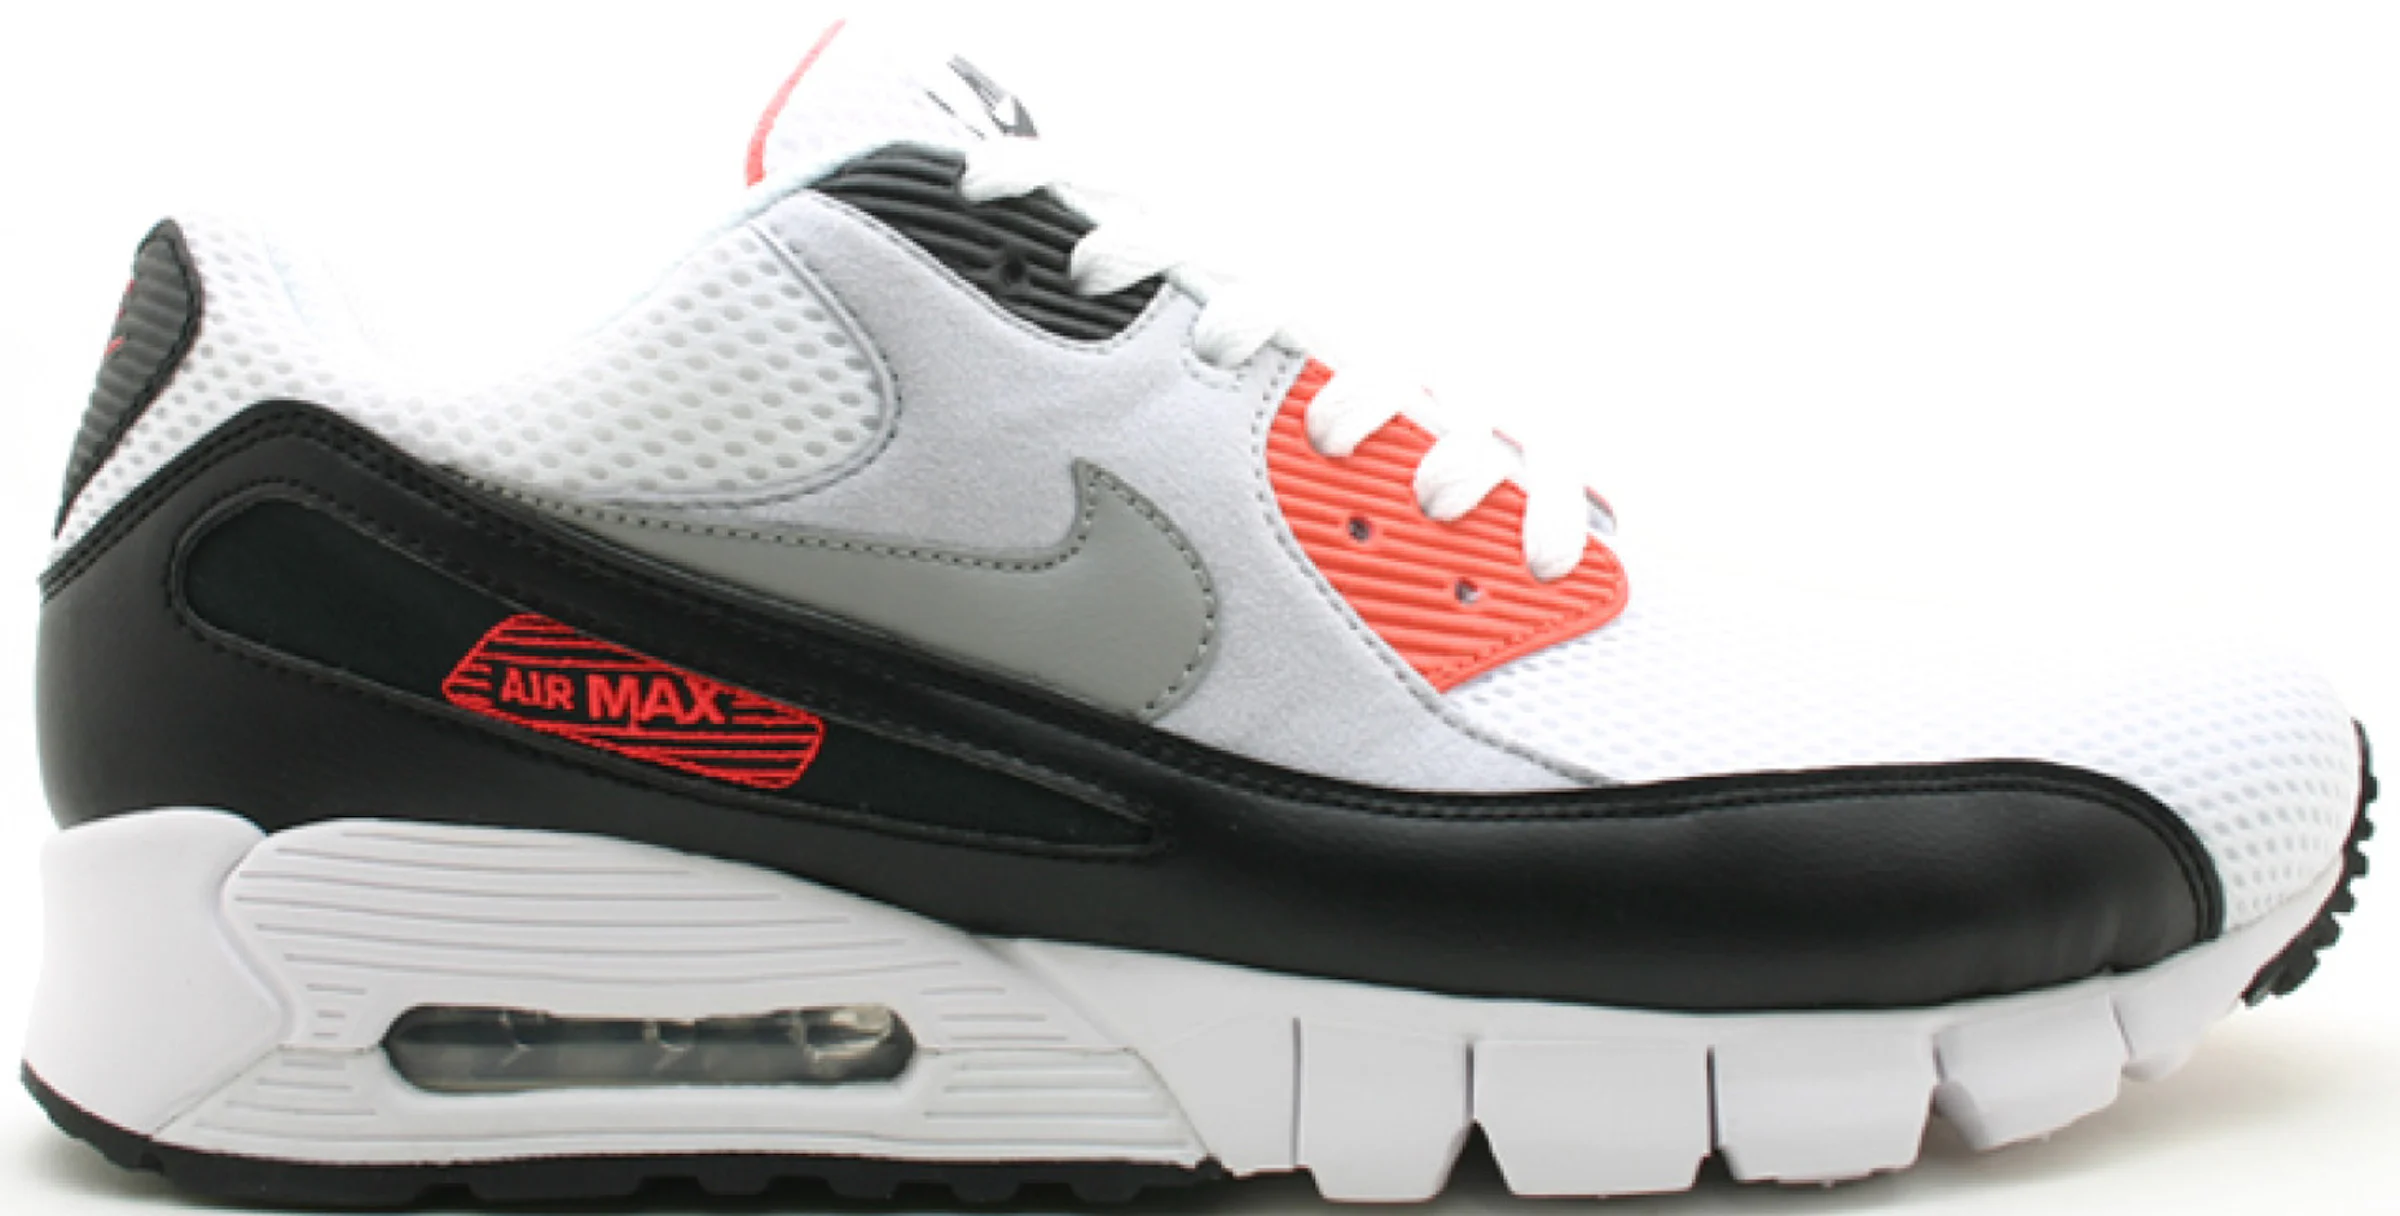 Nike Air Max 90 Review, Facts, Comparison